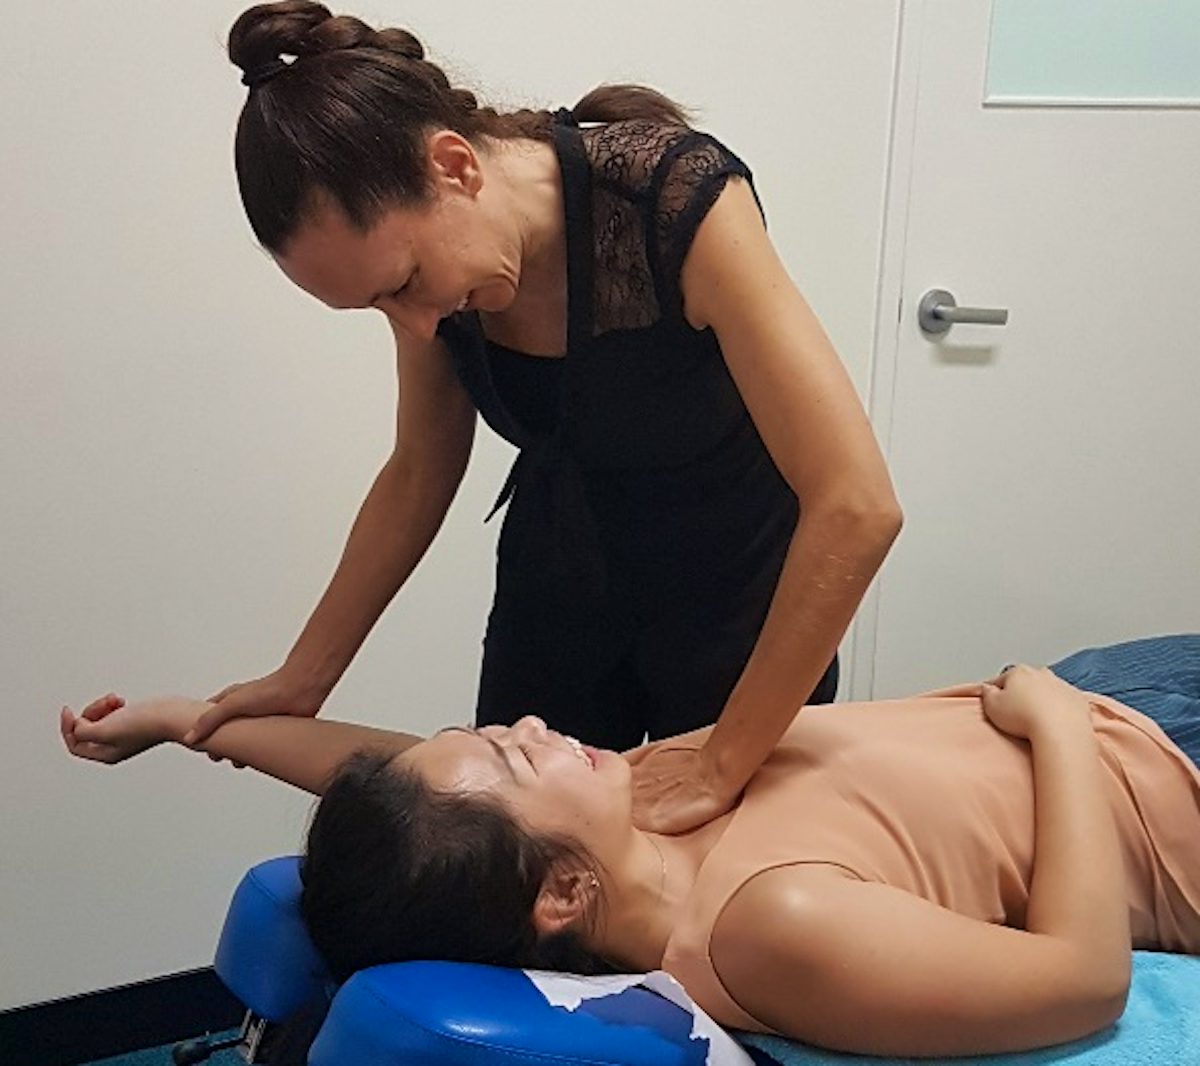 Dr. Linda Schiller provides chiropractic care to woman in Joondalup, Perth